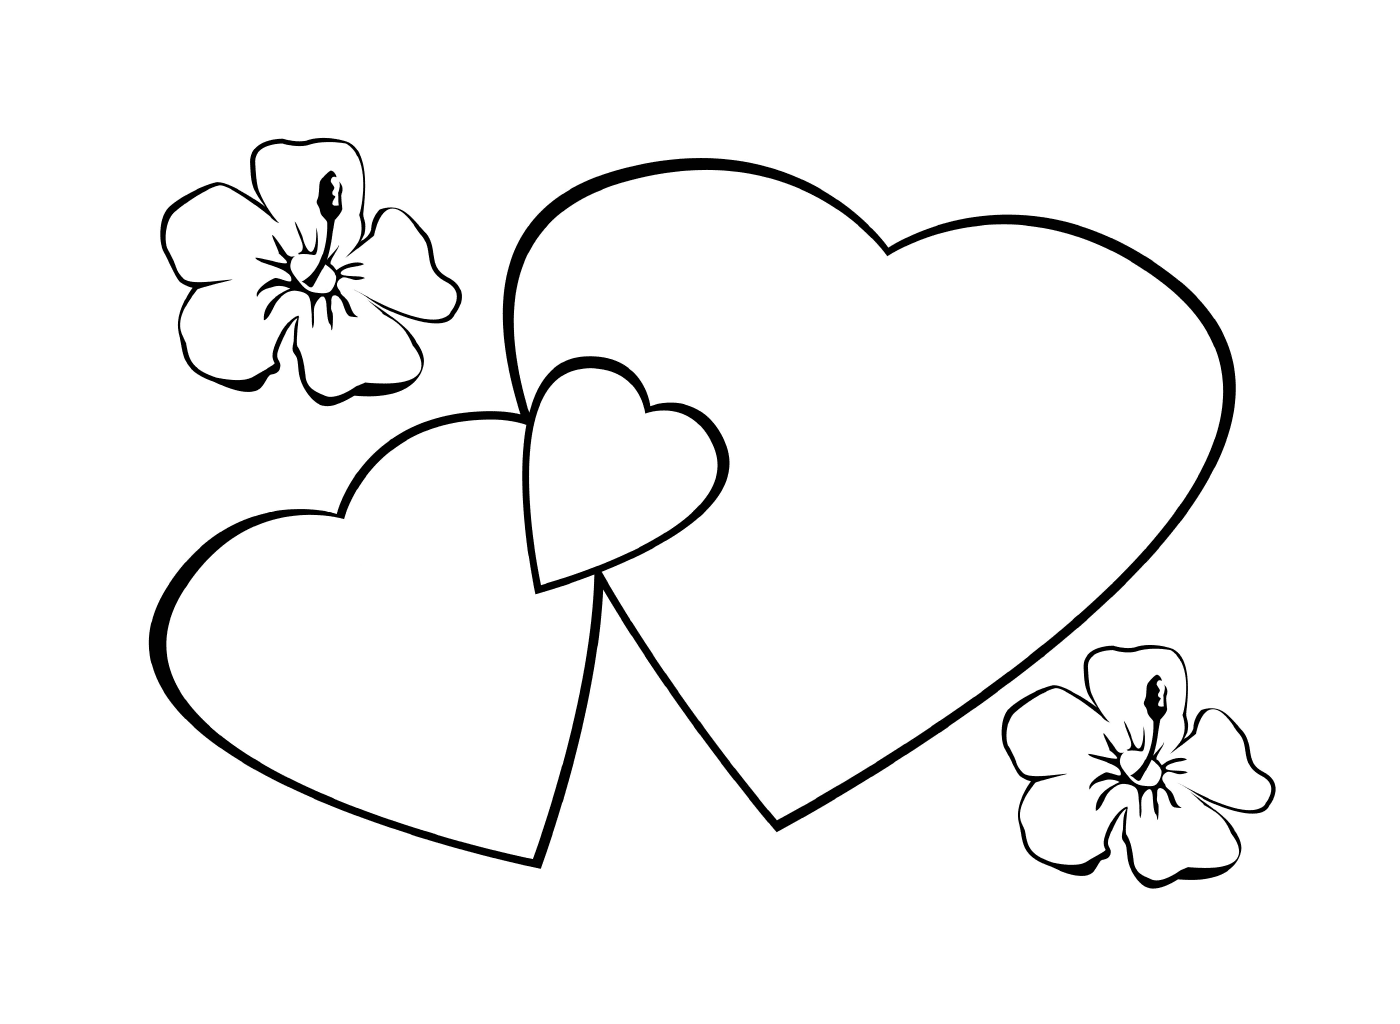  Hearts, Valentine's day flowers 